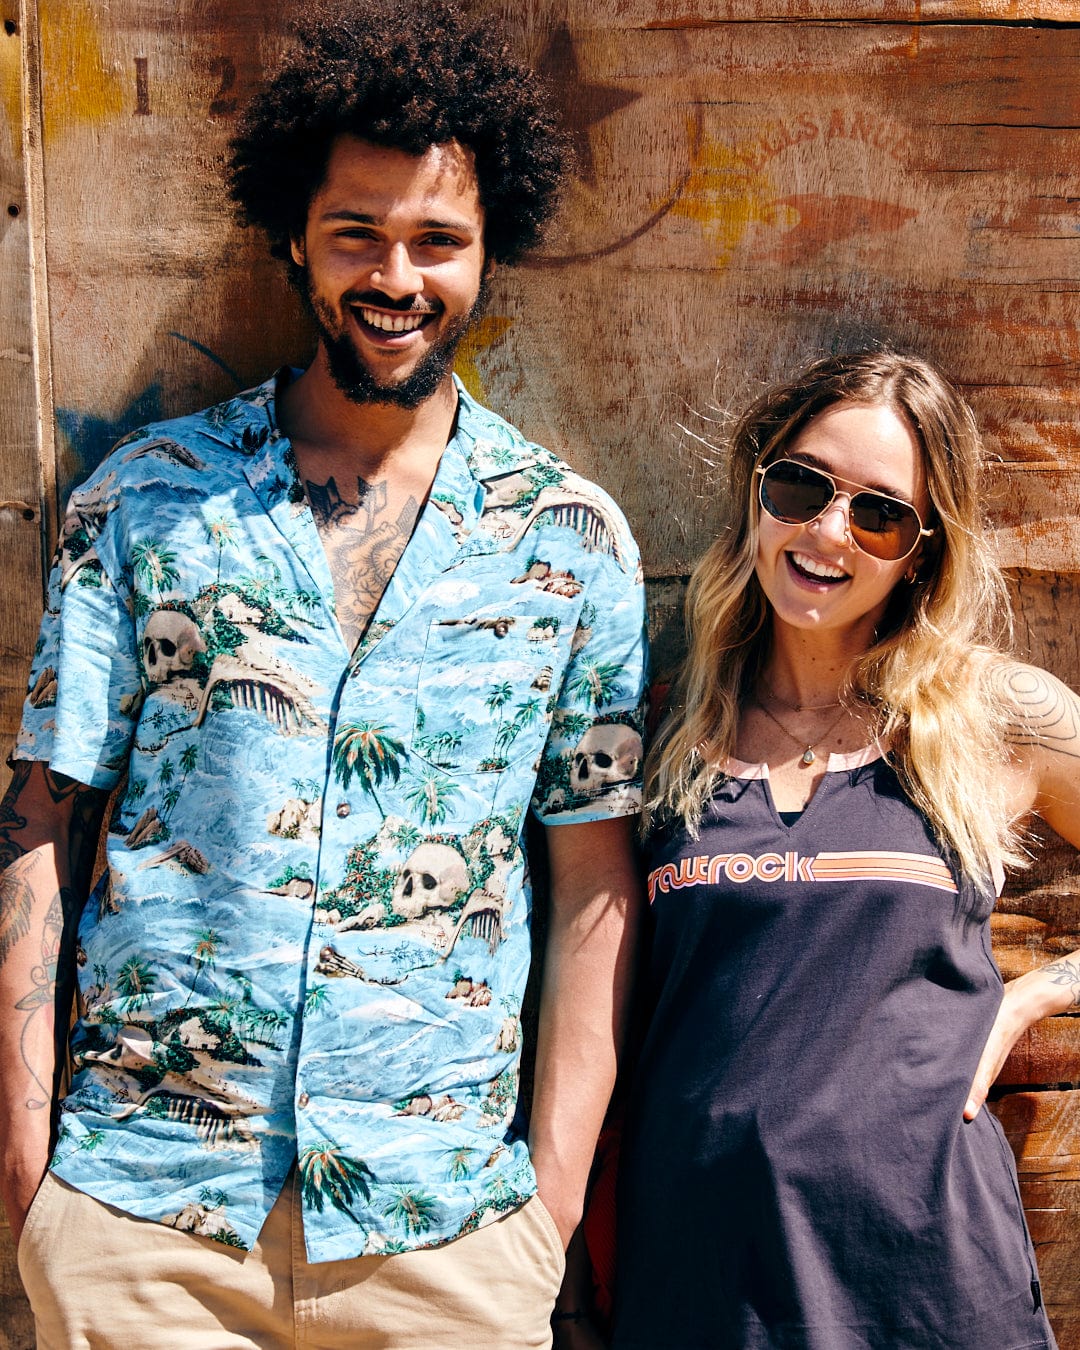 A young man and woman smiling and standing side by side in front of a wooden backdrop, both dressed in casual summer attire made from 100% cotton Saltrock Retro Ribbon - Womens Vest - Dark Grey.